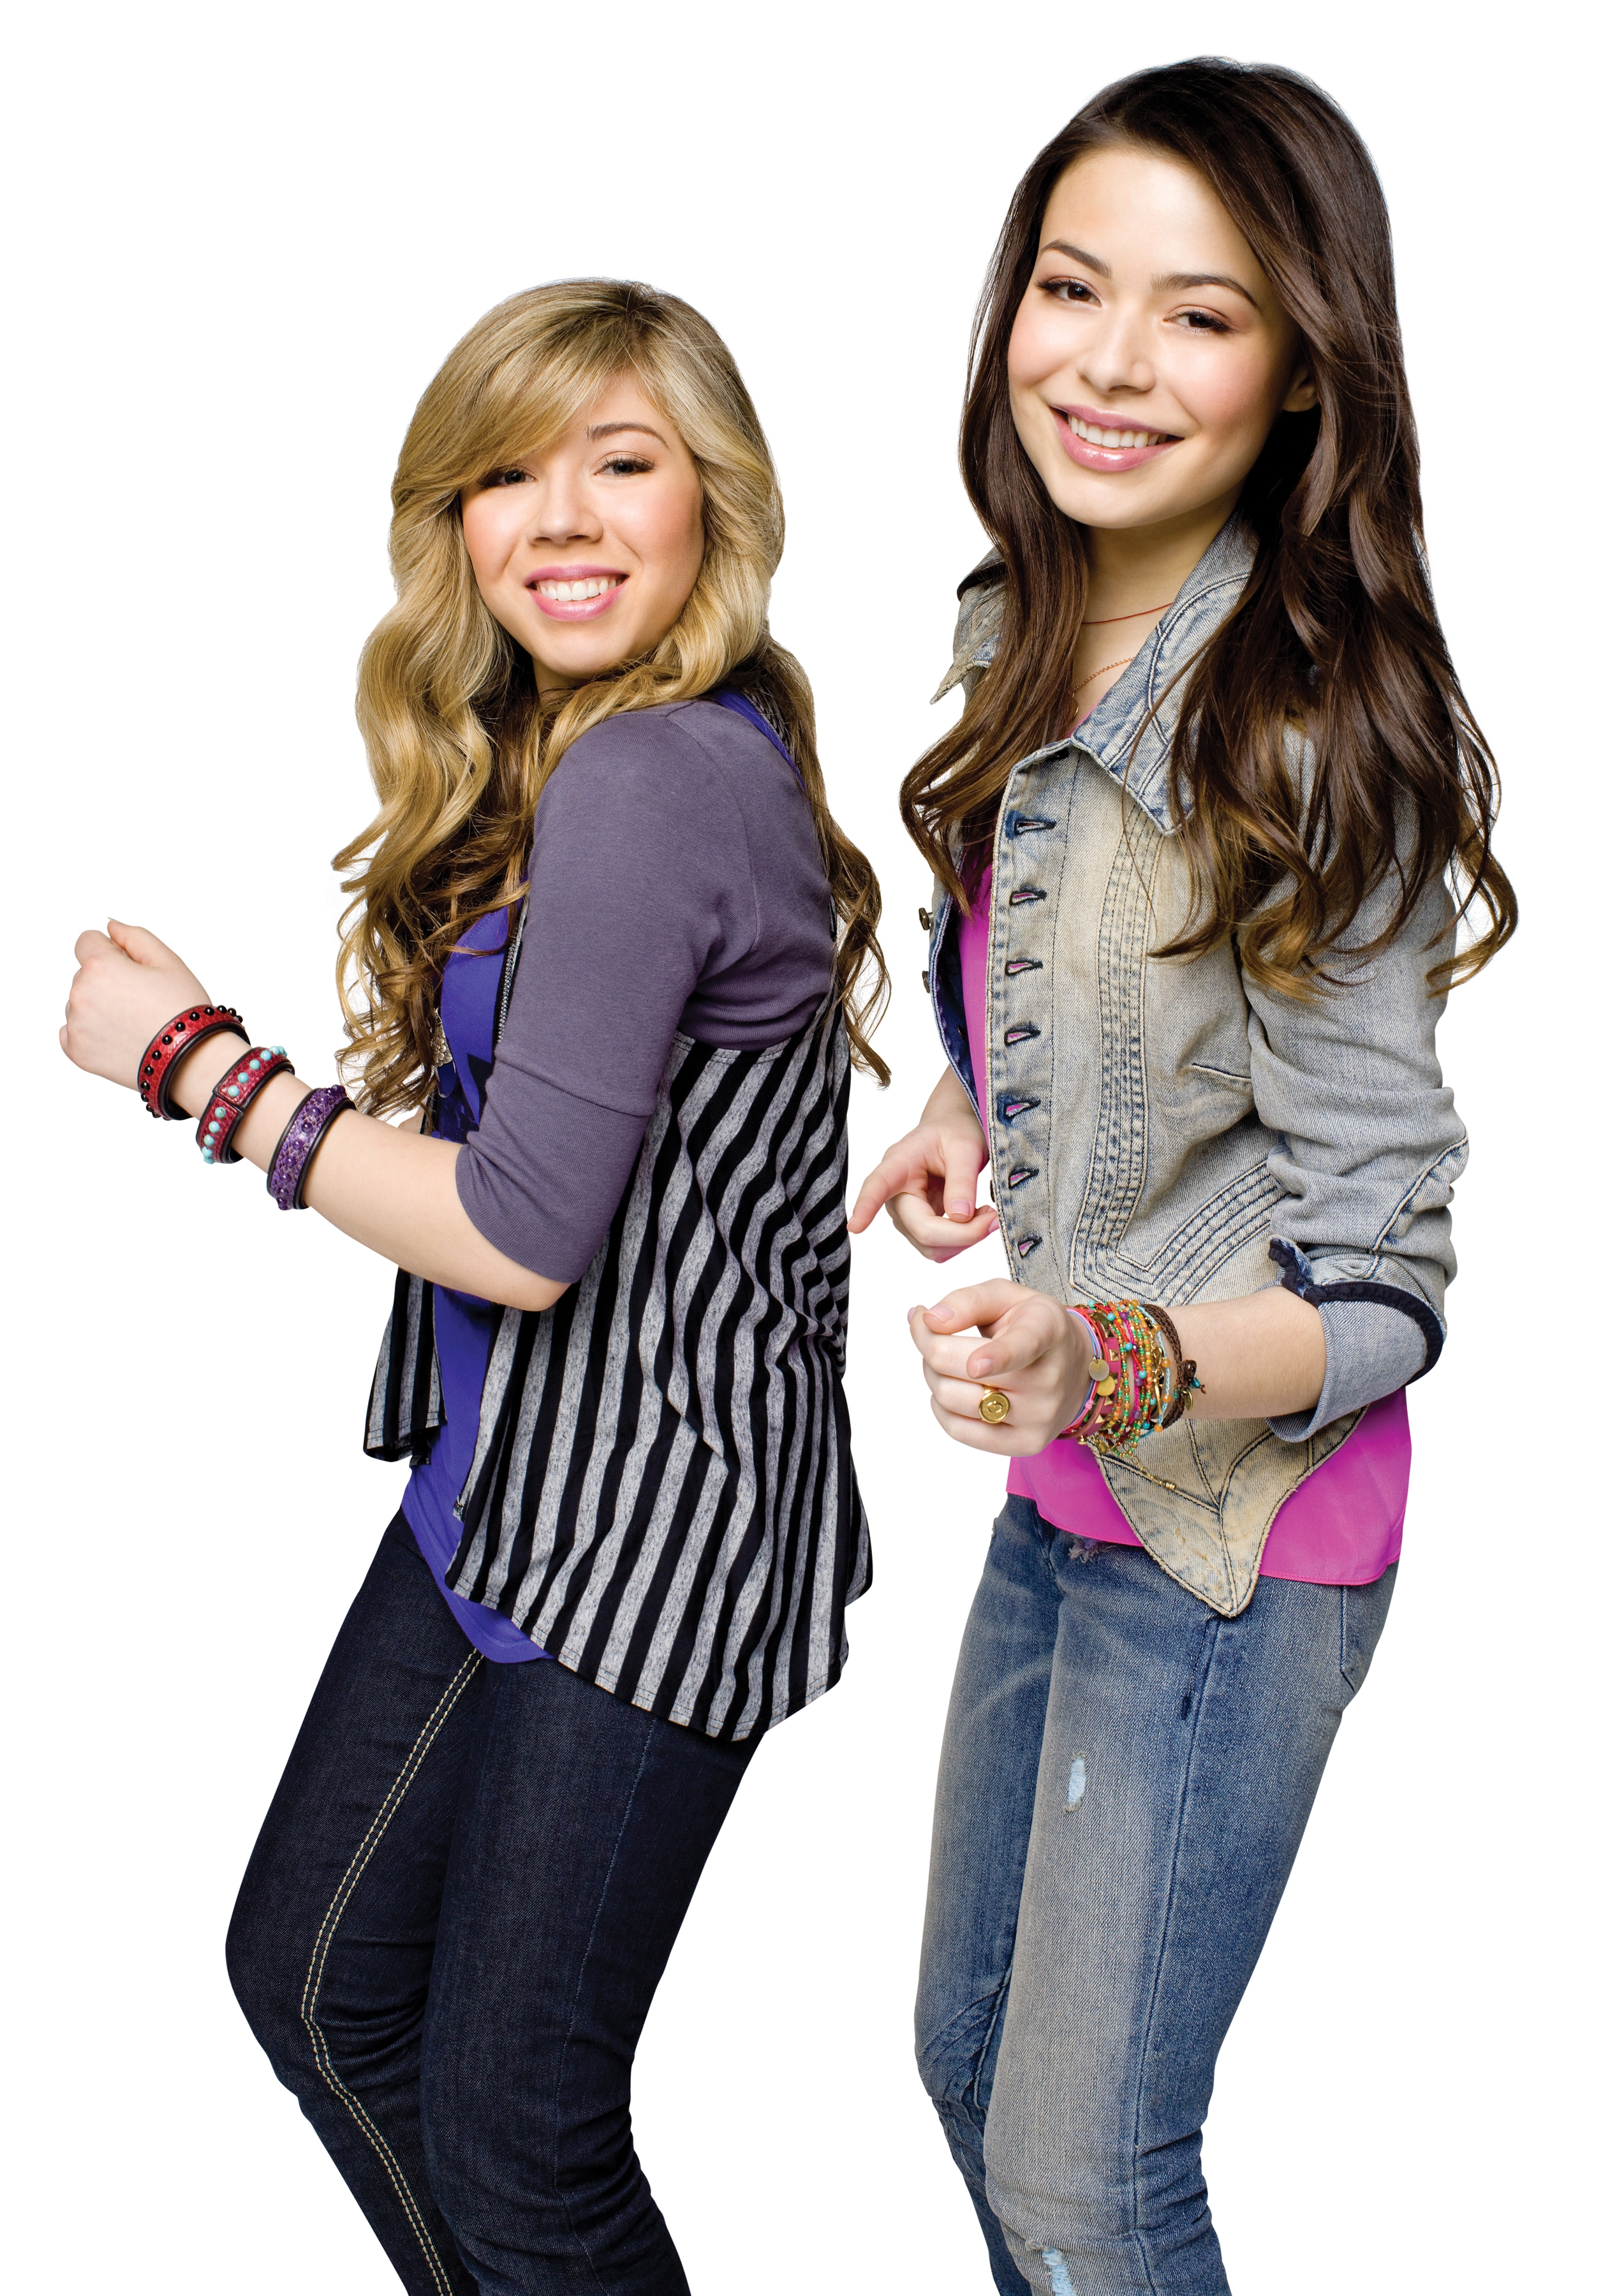 upcoming jun or jennette mccurdy Taggedicarly question what is a note